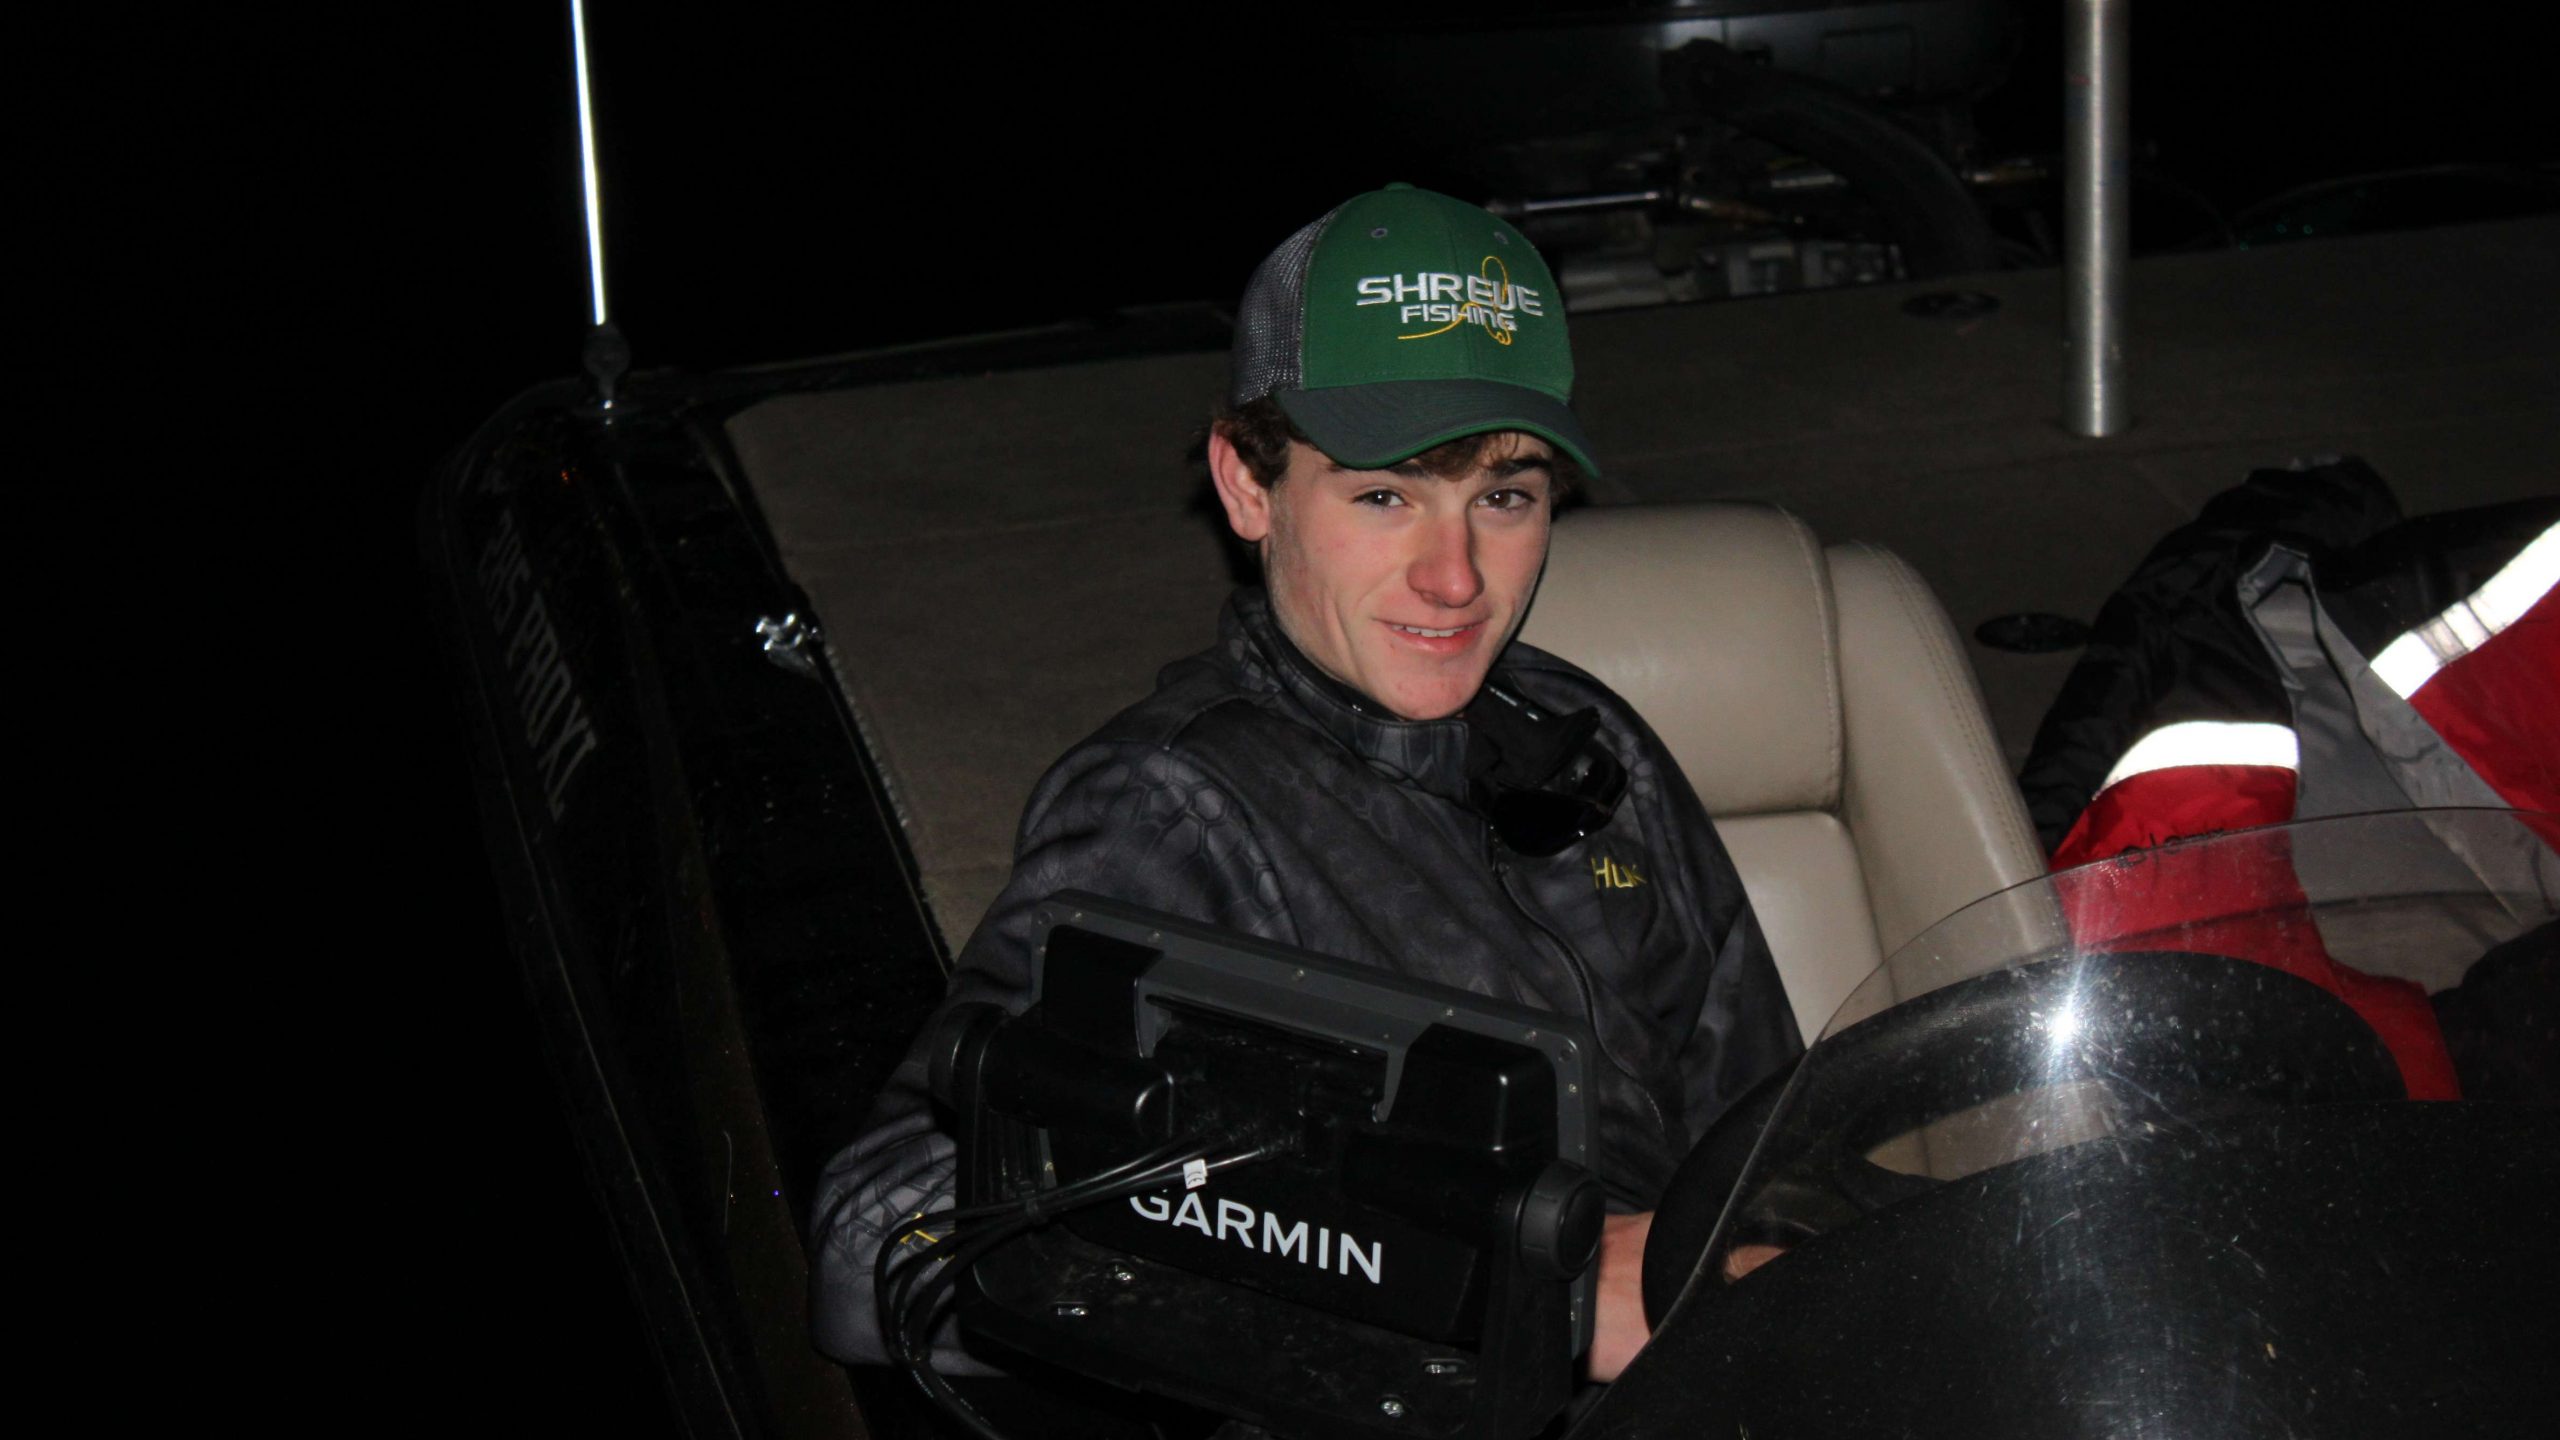 Noah Westmoreland of Captain Shreve (La.) High was napping
before the flash of the camera startled him to life.